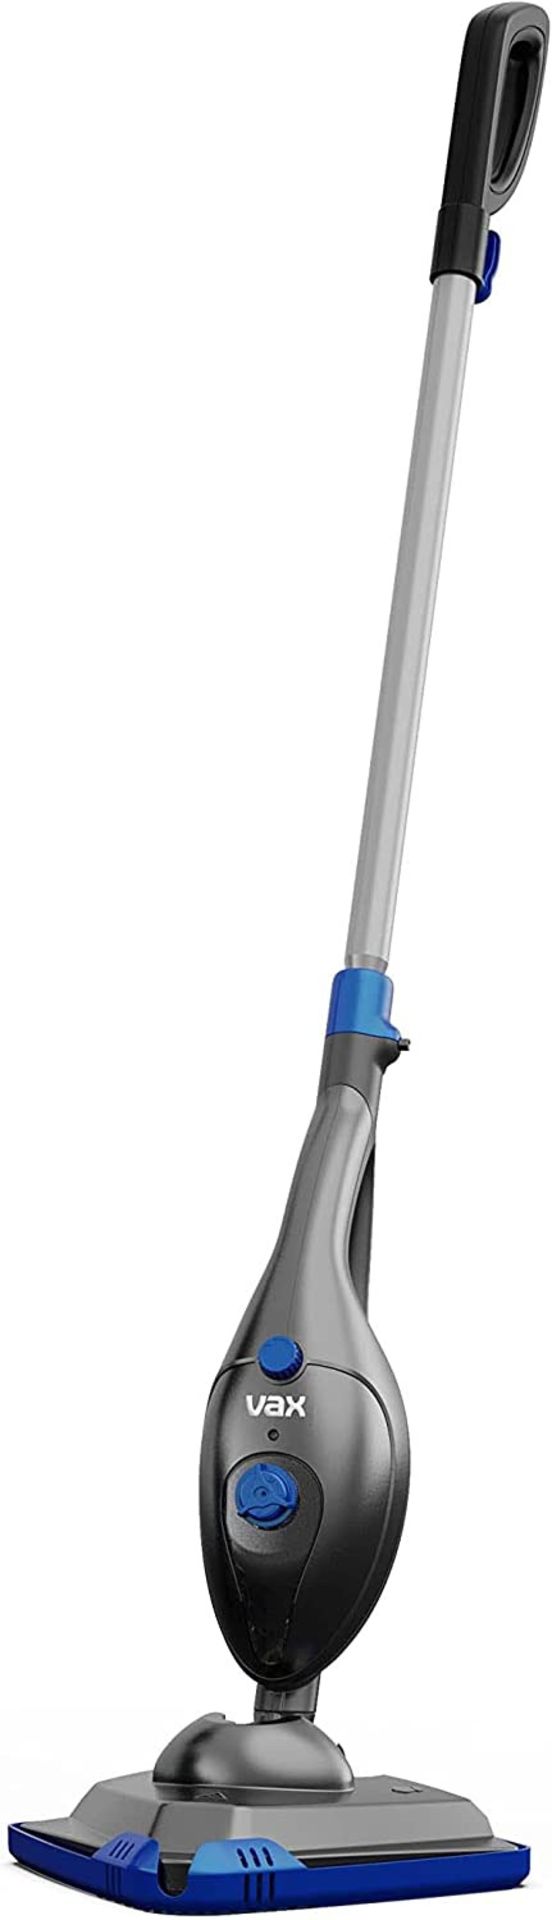 Vax Steam Glide Plus Multifunction Steam Mop | Converts to Handheld | CDHF-SGXA, 1300W FREE DELIVERY - Image 2 of 4